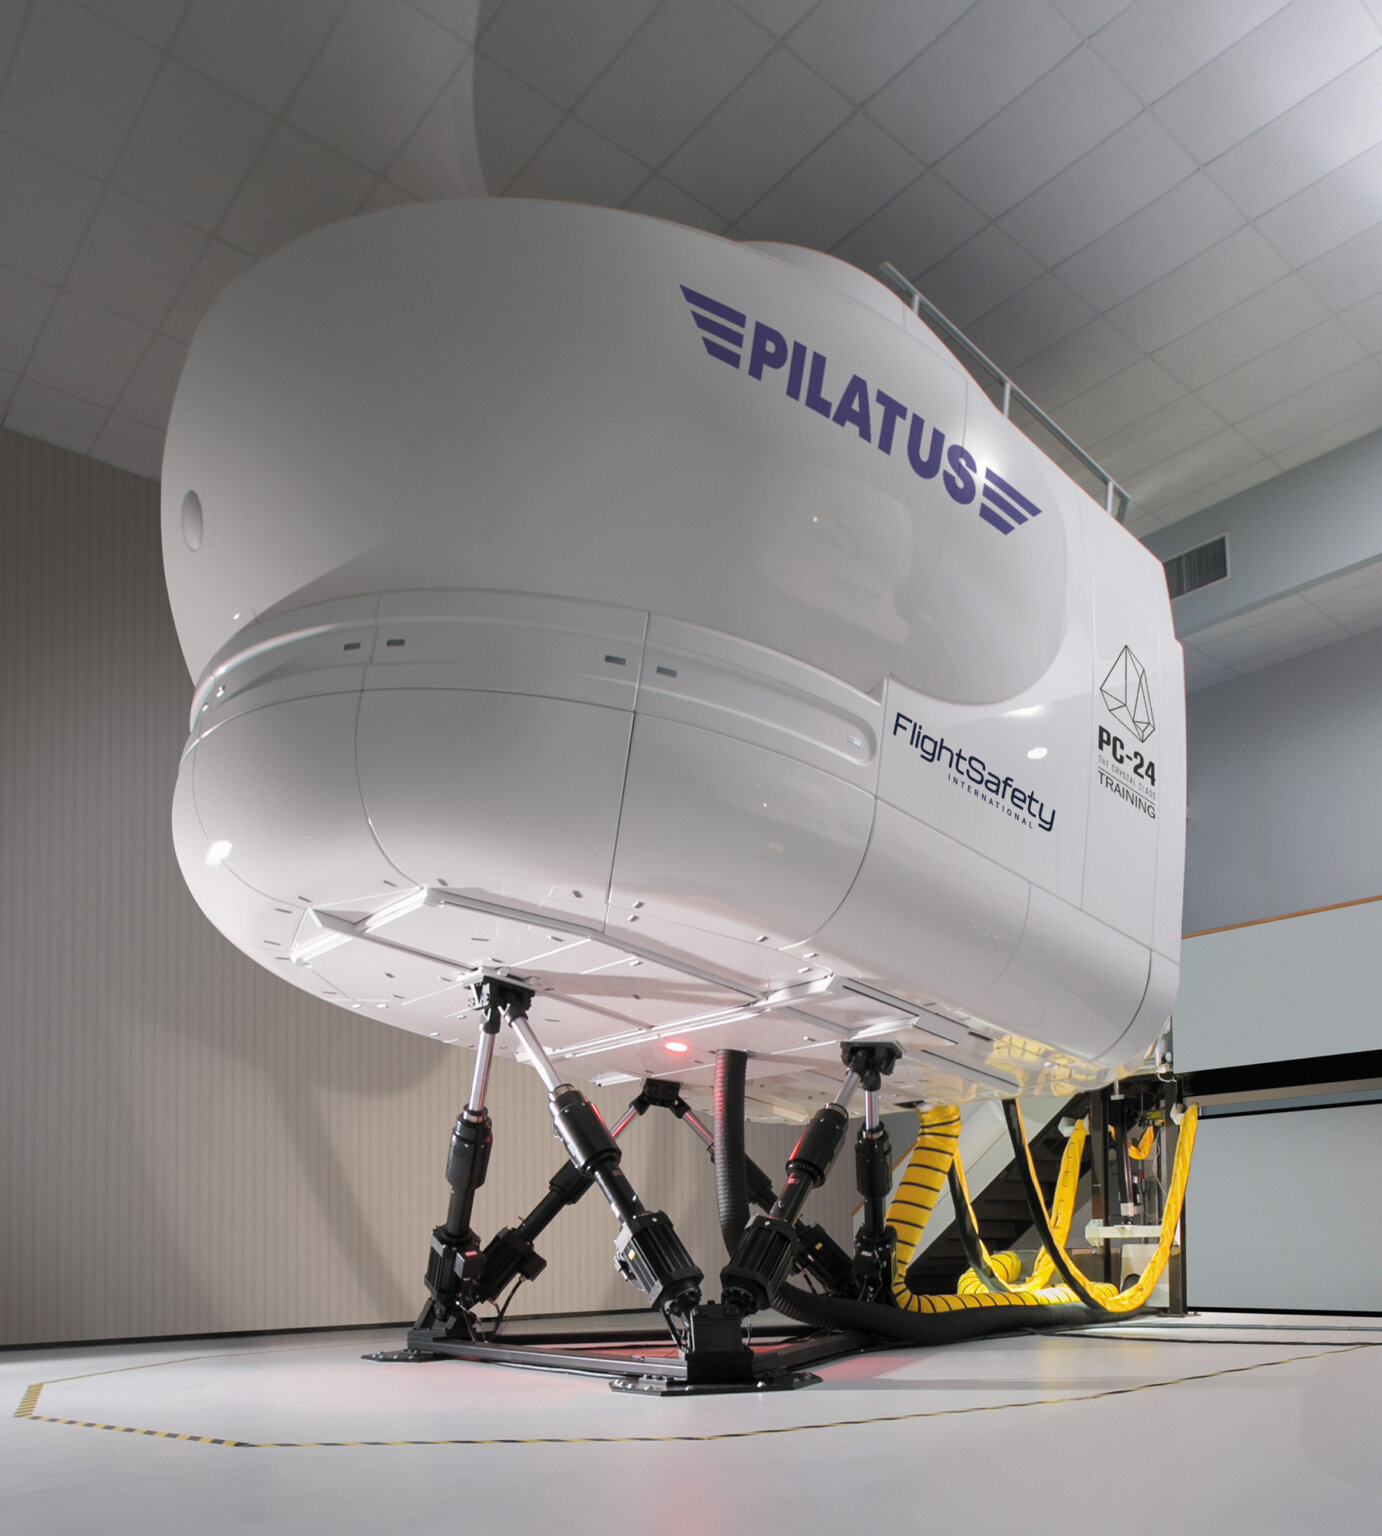 FlightSafety International expands PC-24 training capacity in Europe